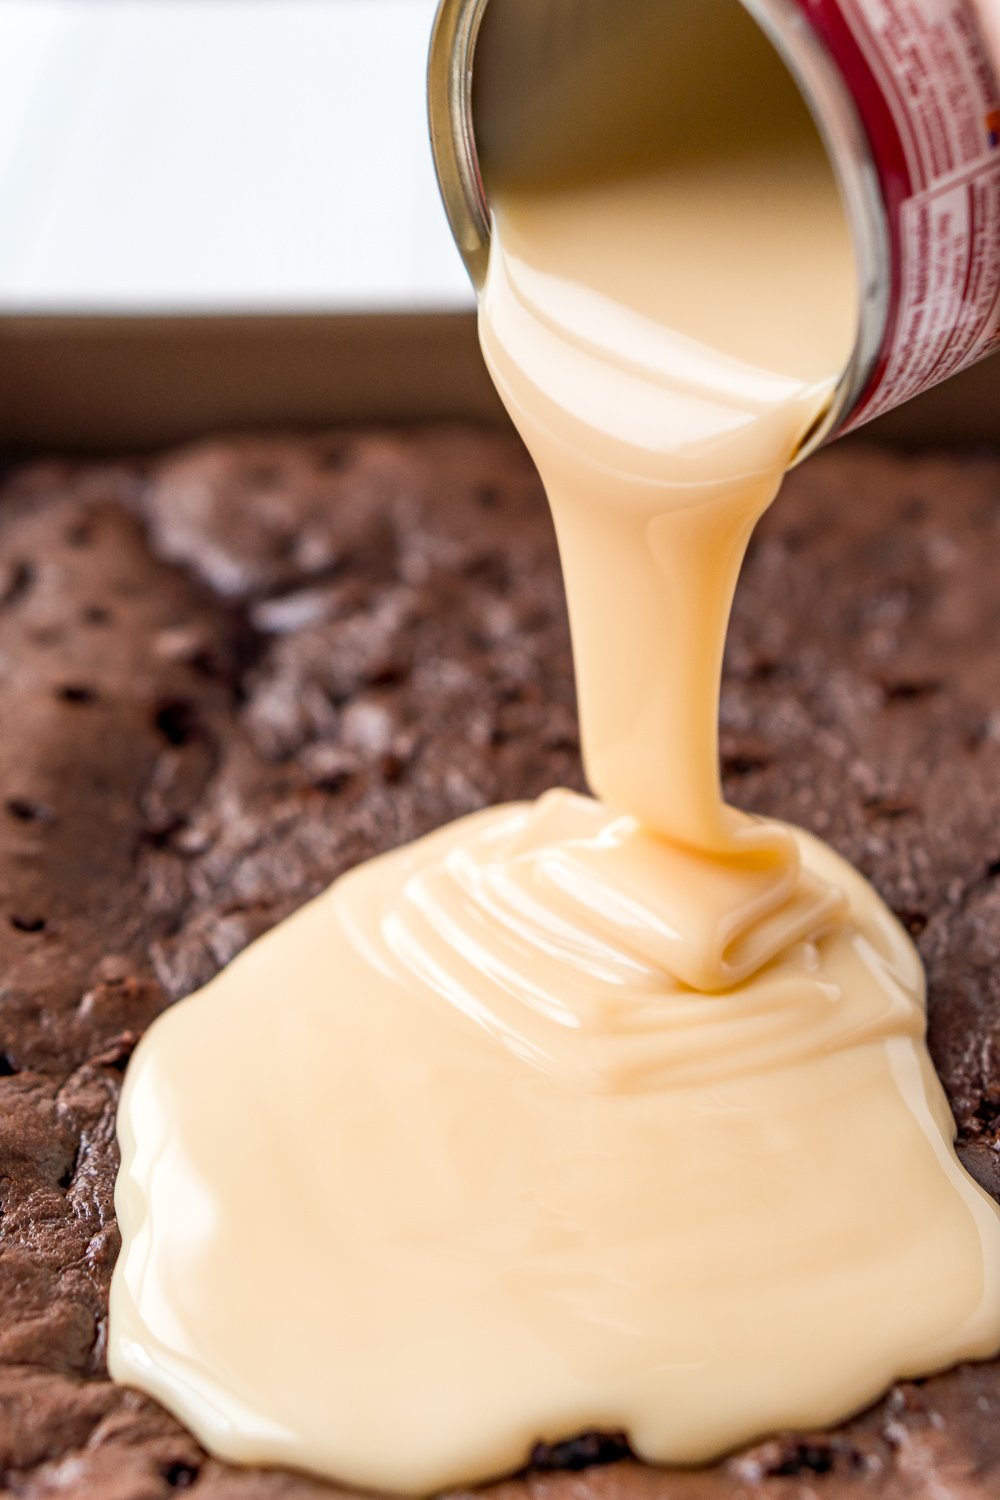 Can of sweetened condensed milk being poured over a chocolate cake.